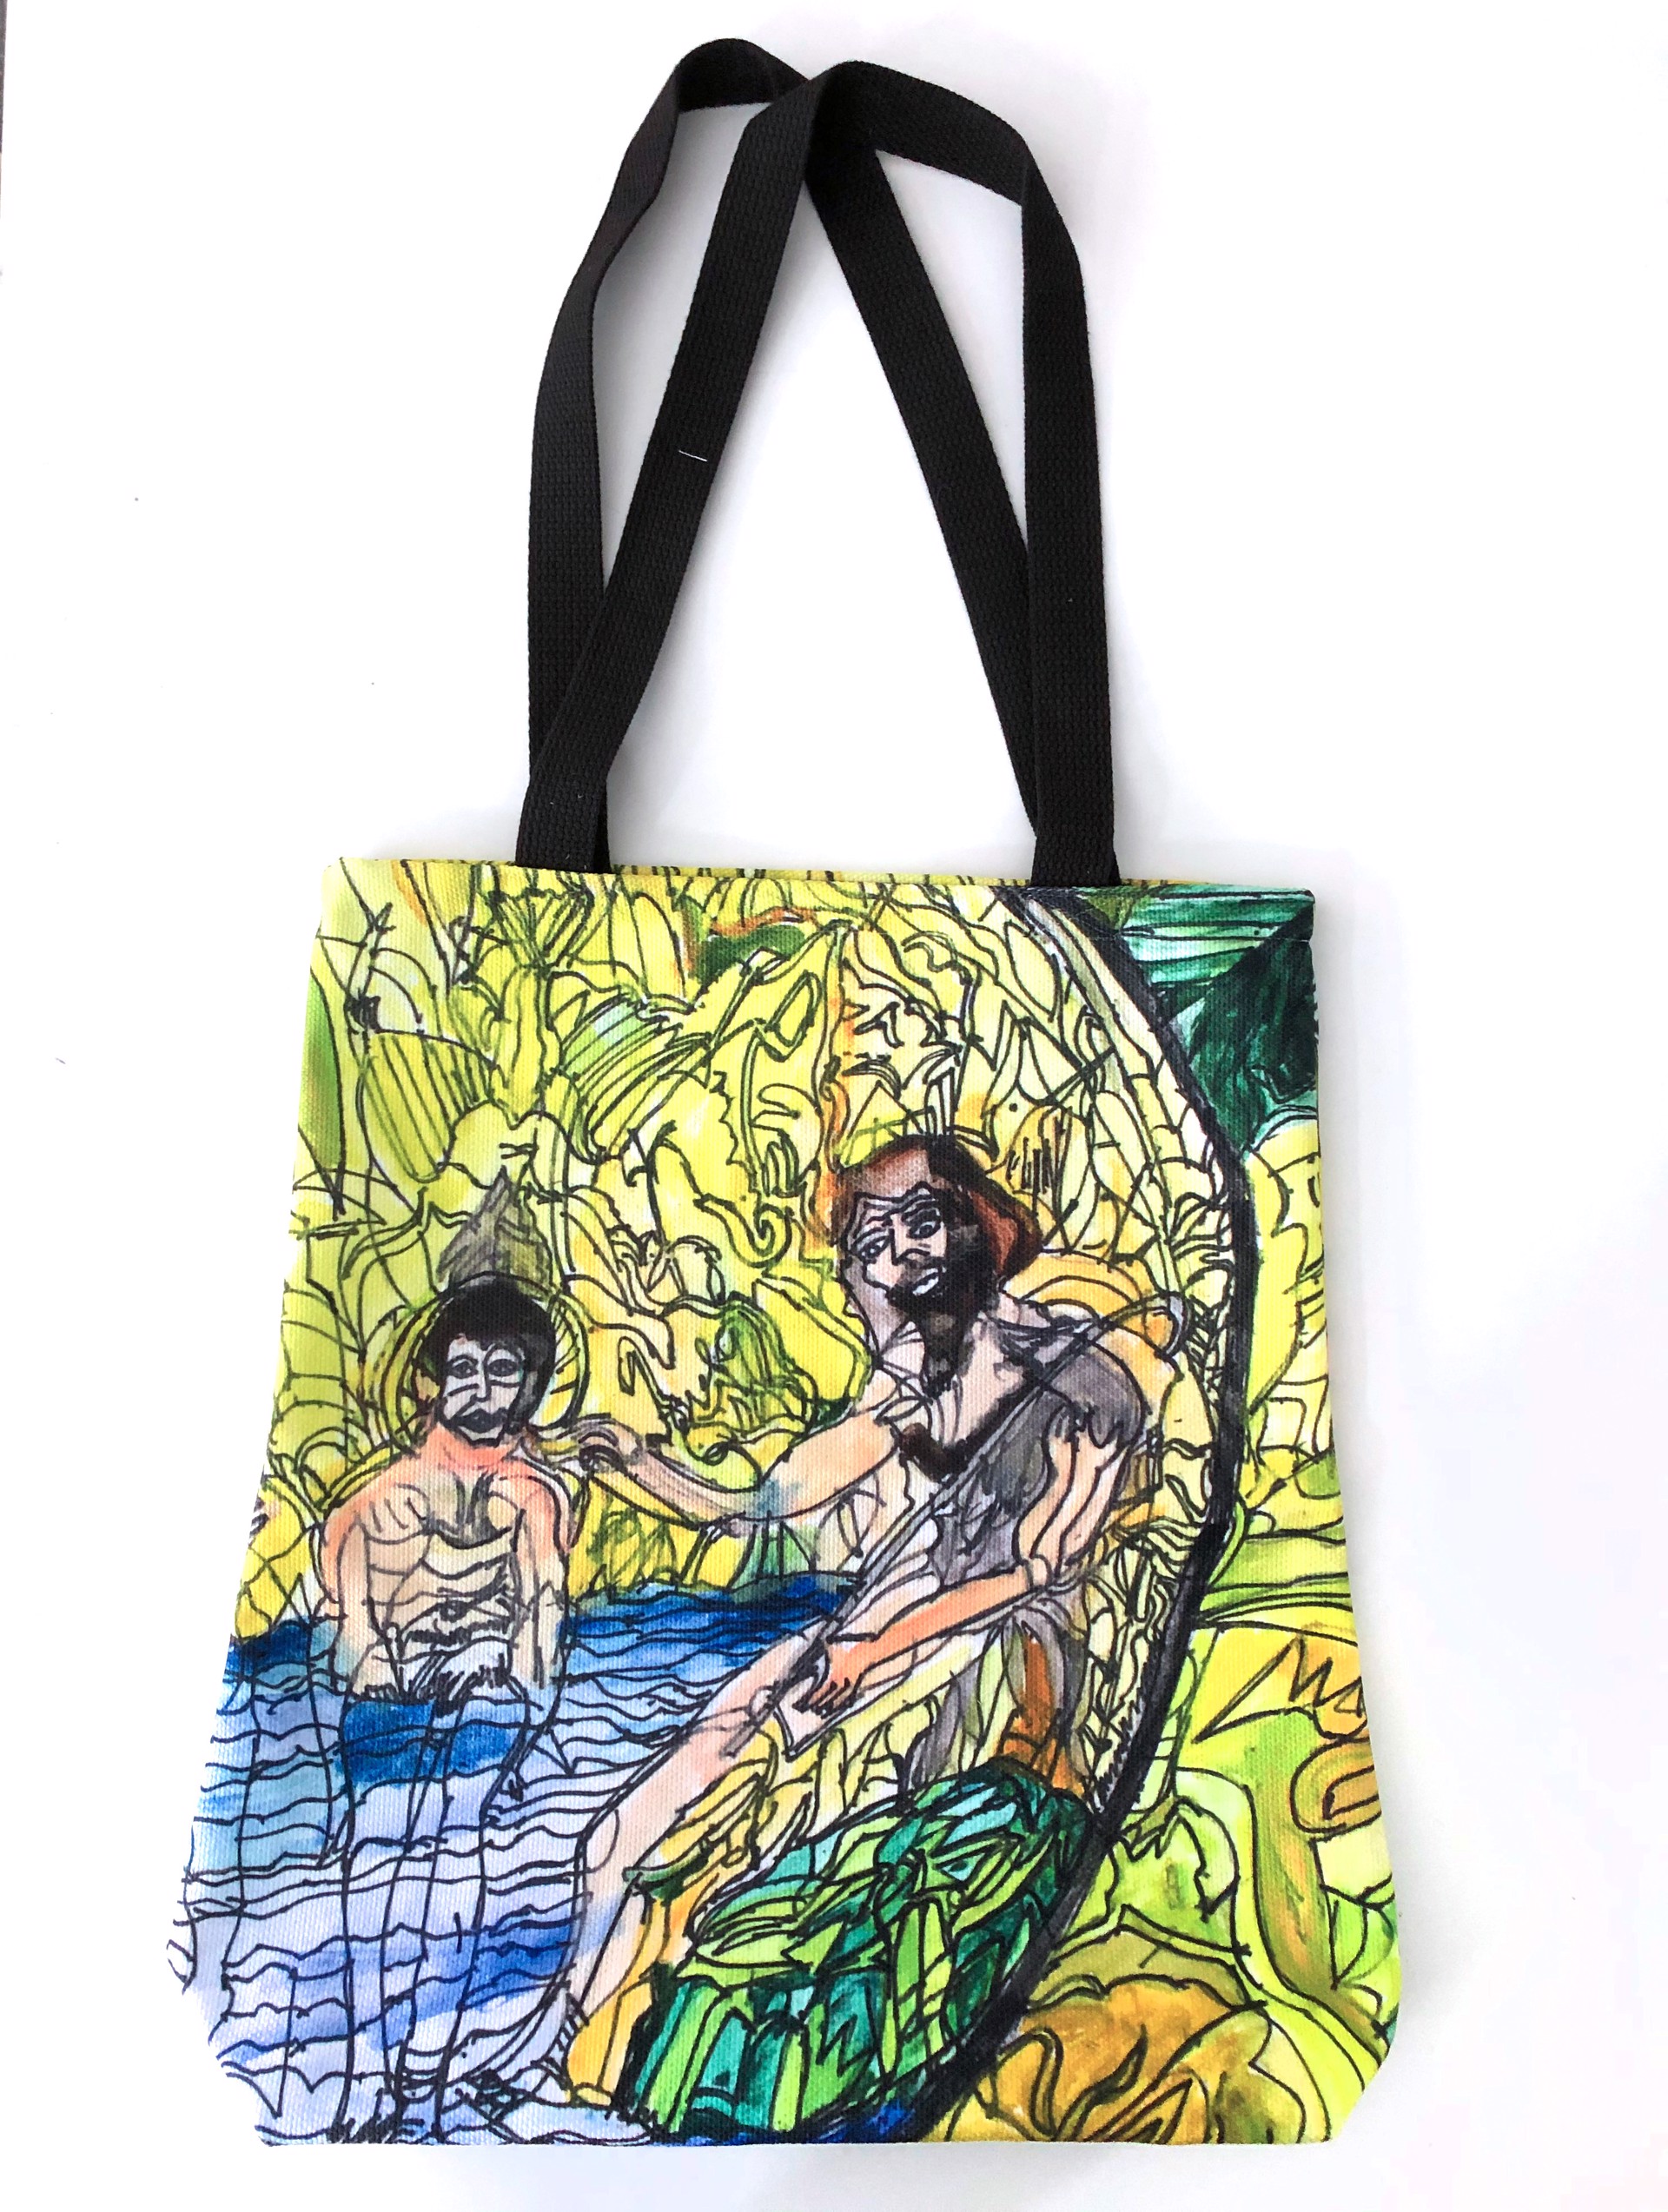 Raymond Lewis "Washing Up" tote bag by Art Enables Merchandise